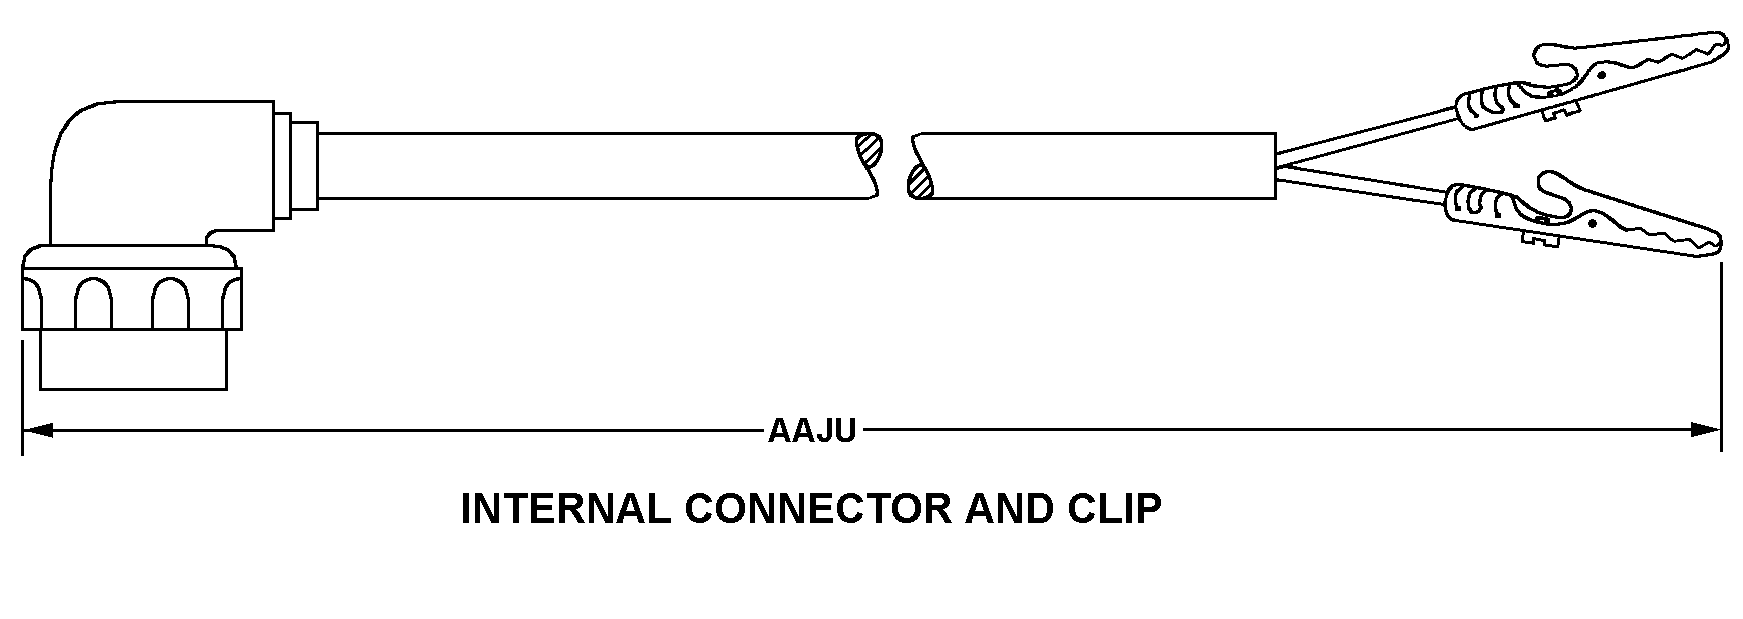 INTERNAL CONNECTOR AND CLIP style nsn 5995-00-008-5112